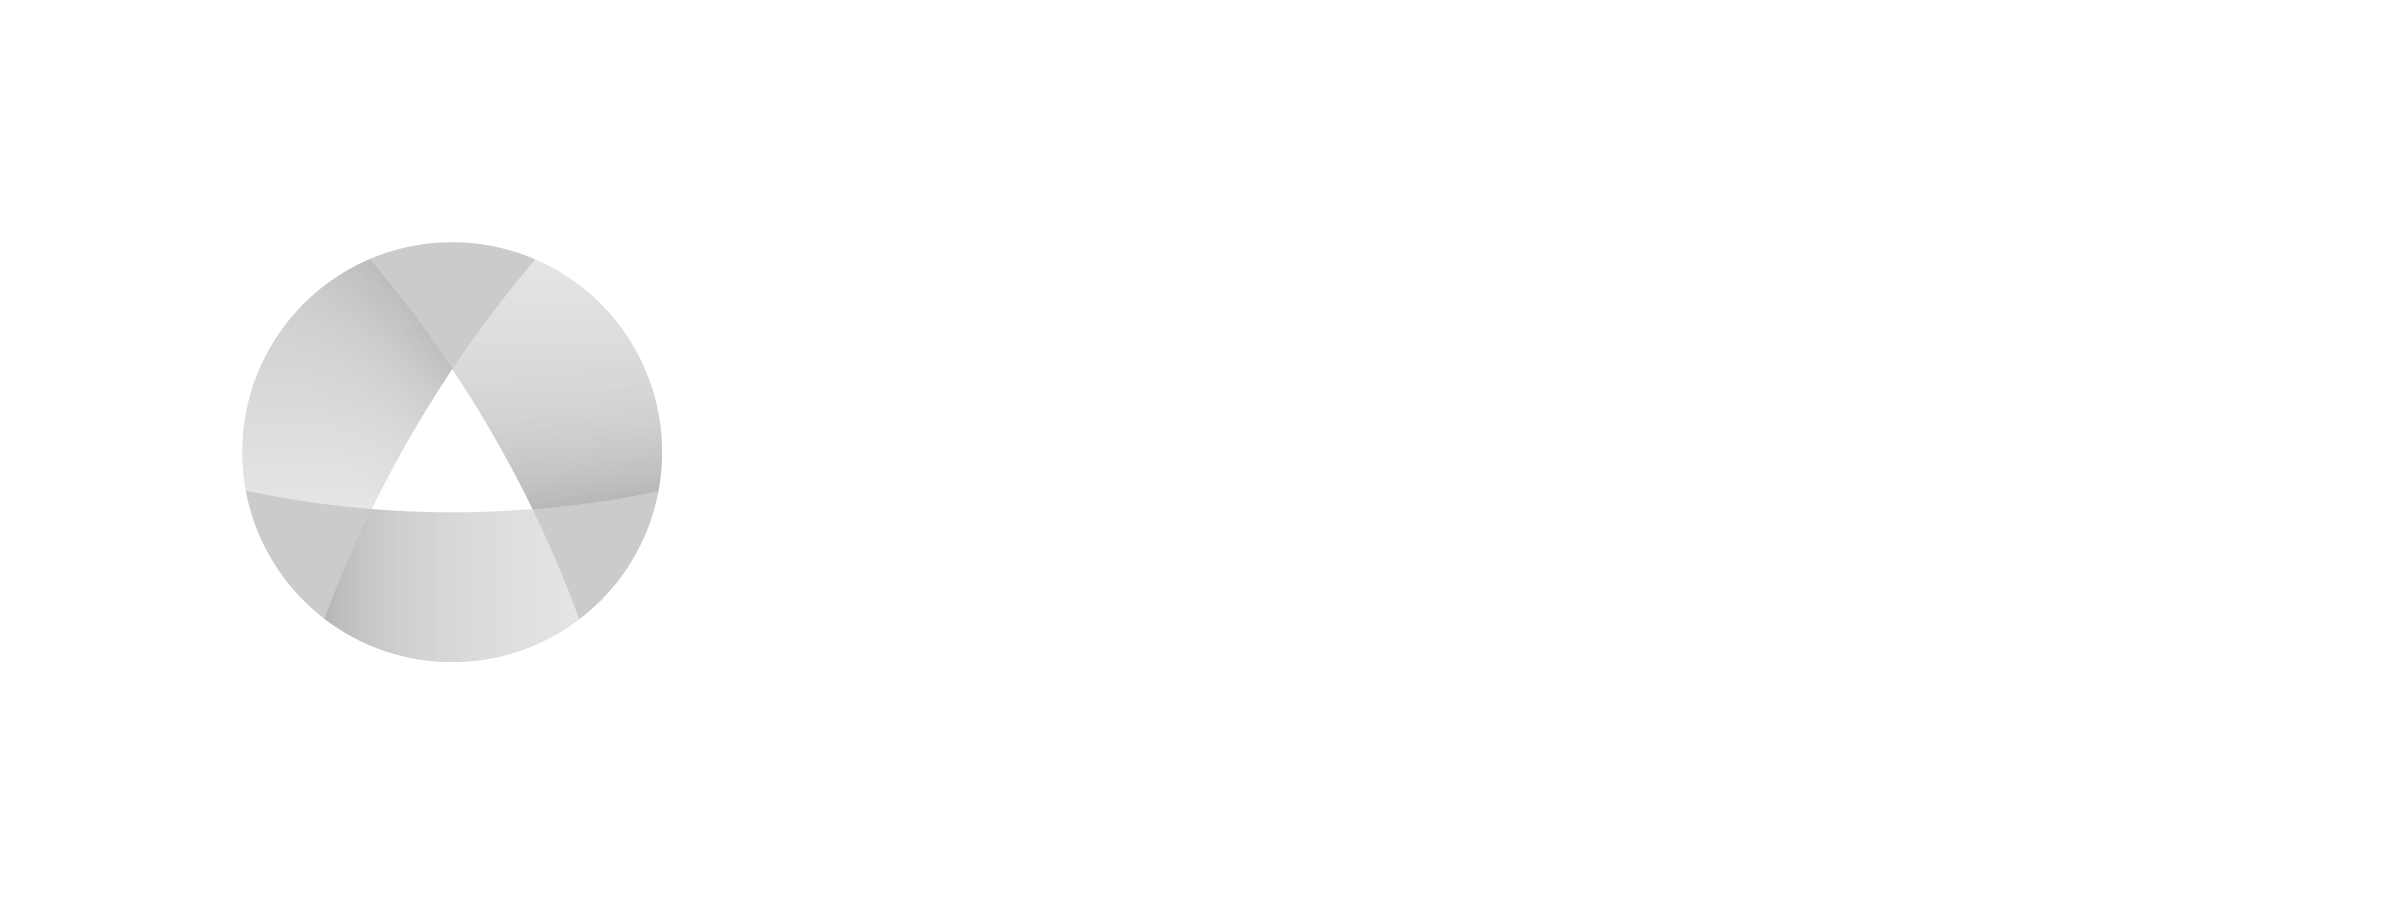 The APP Group